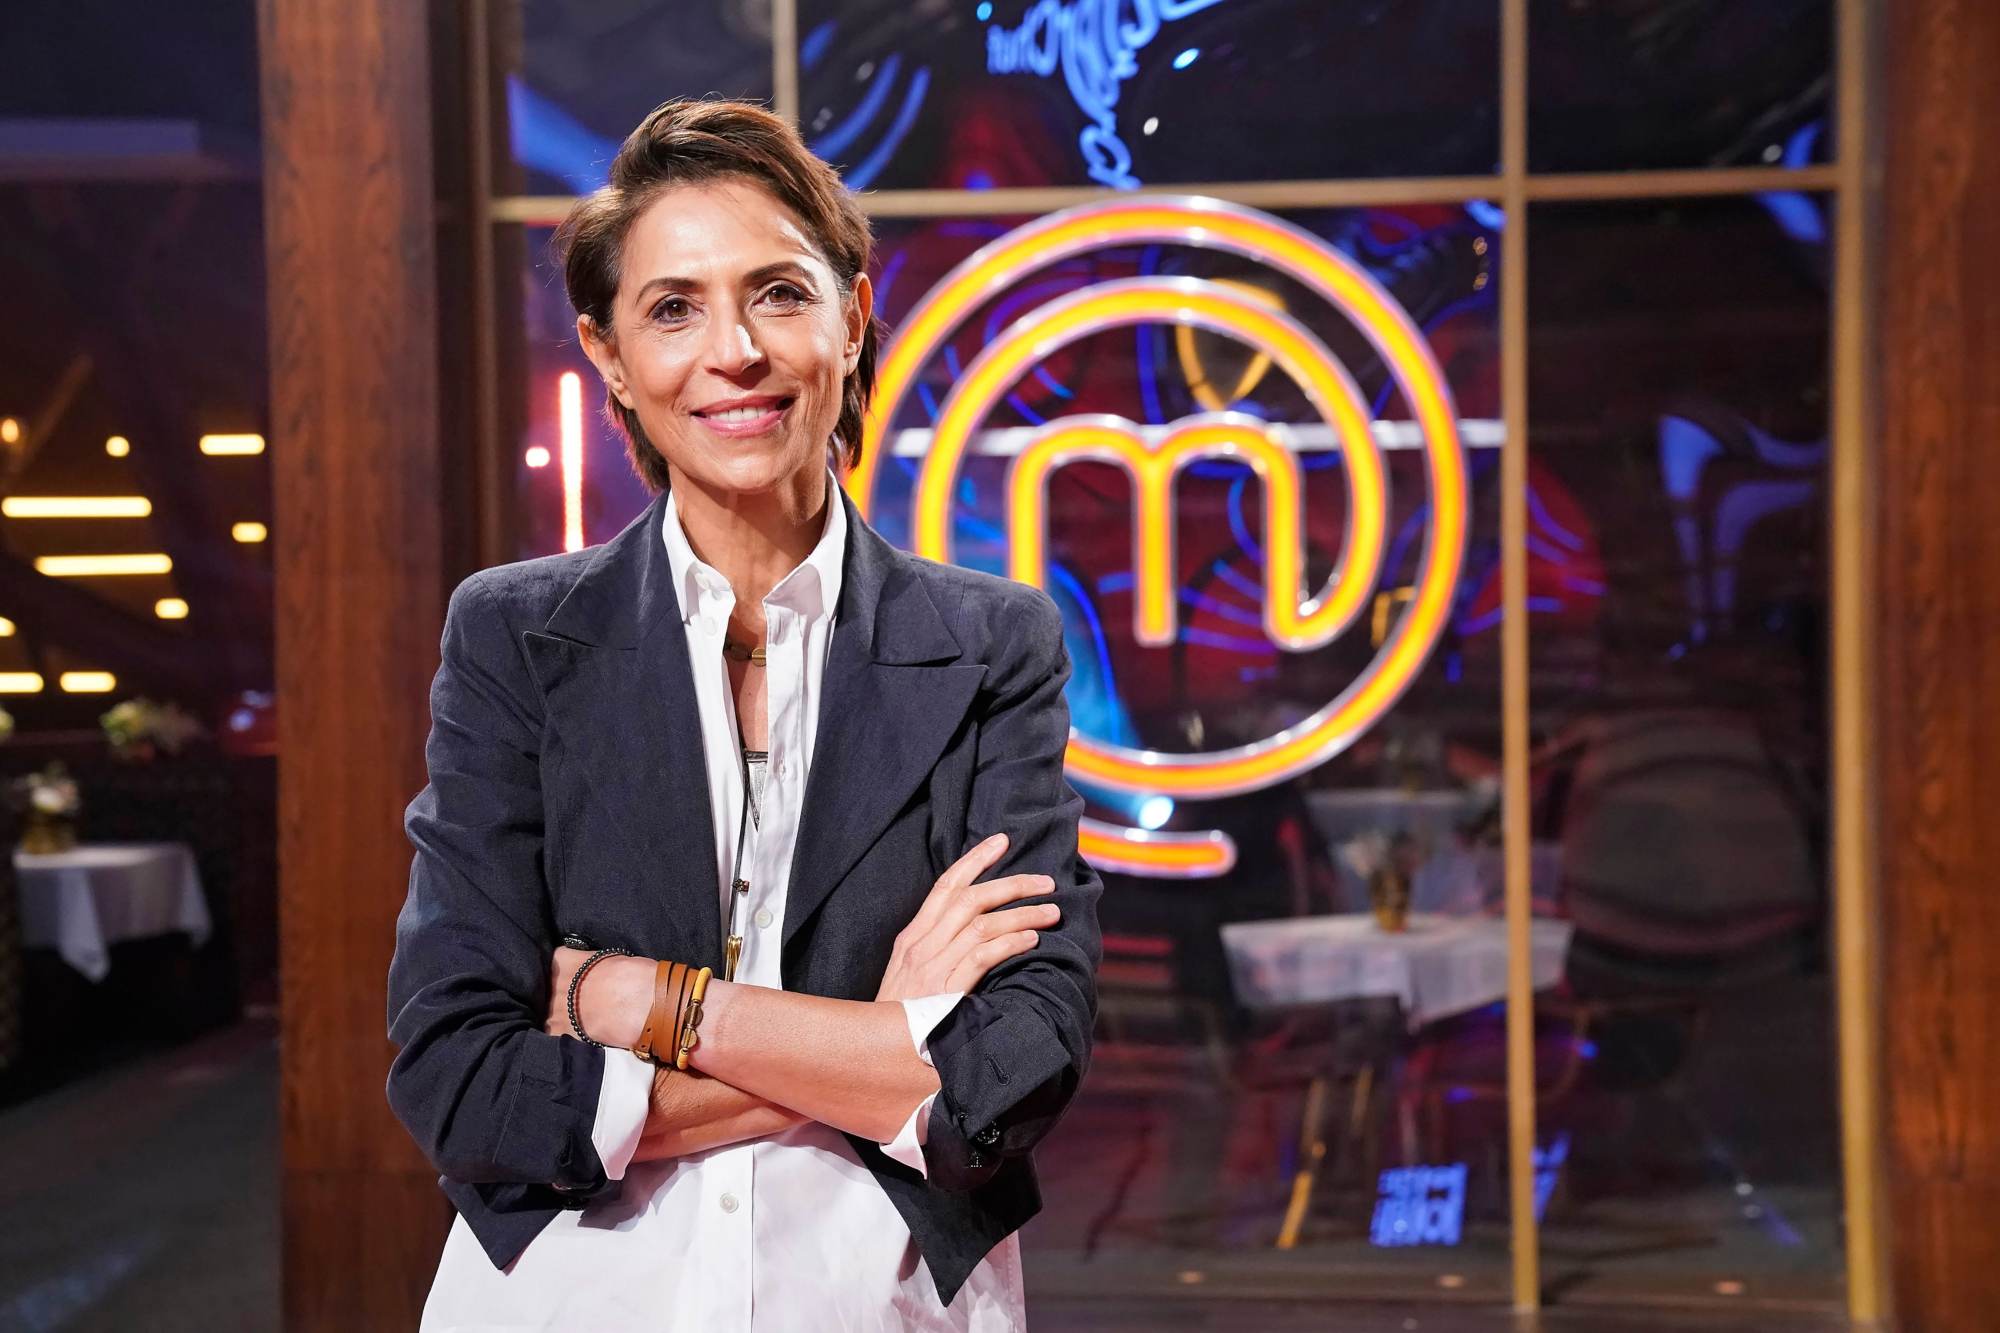 Dominique Crenn standing with her arms crossed in front of the 'MasterChef' logo